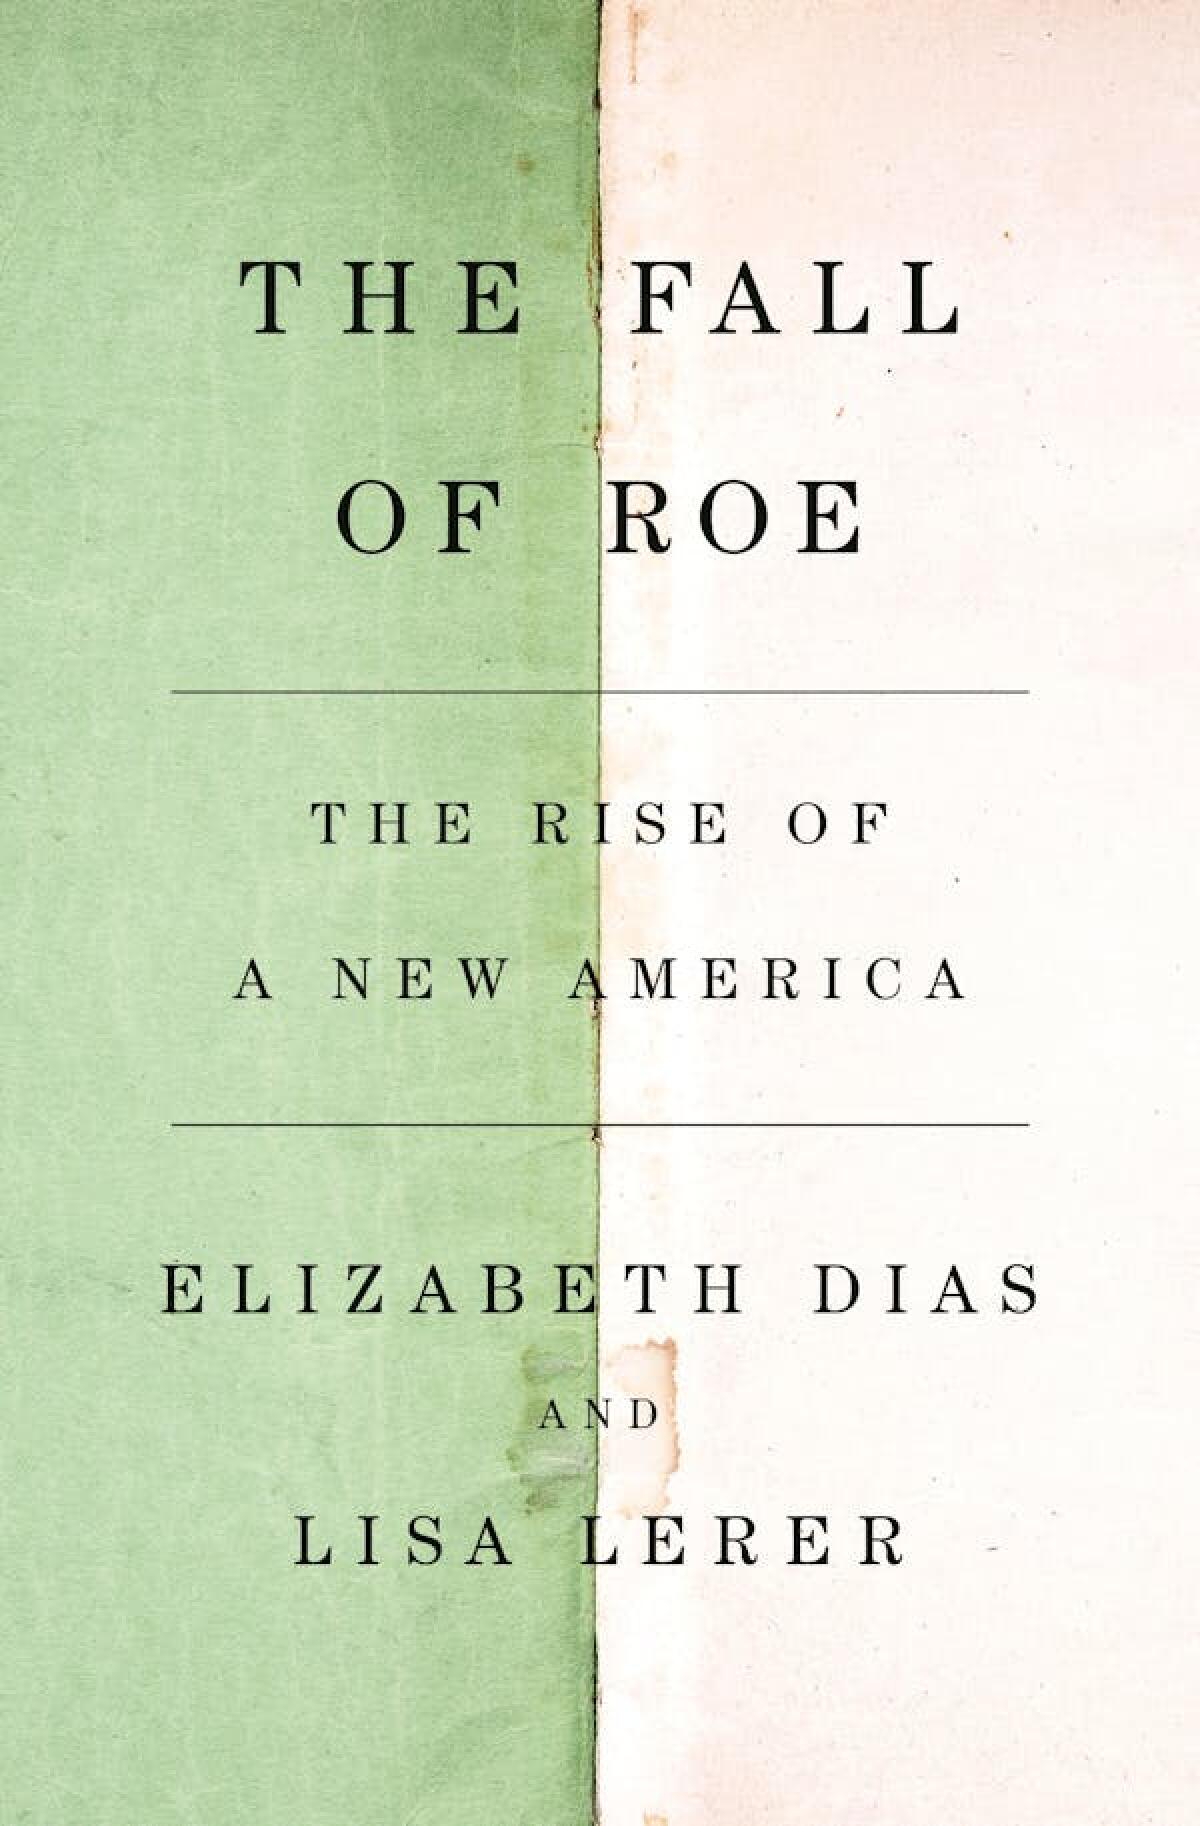 The cover of "The Fall of Roe"